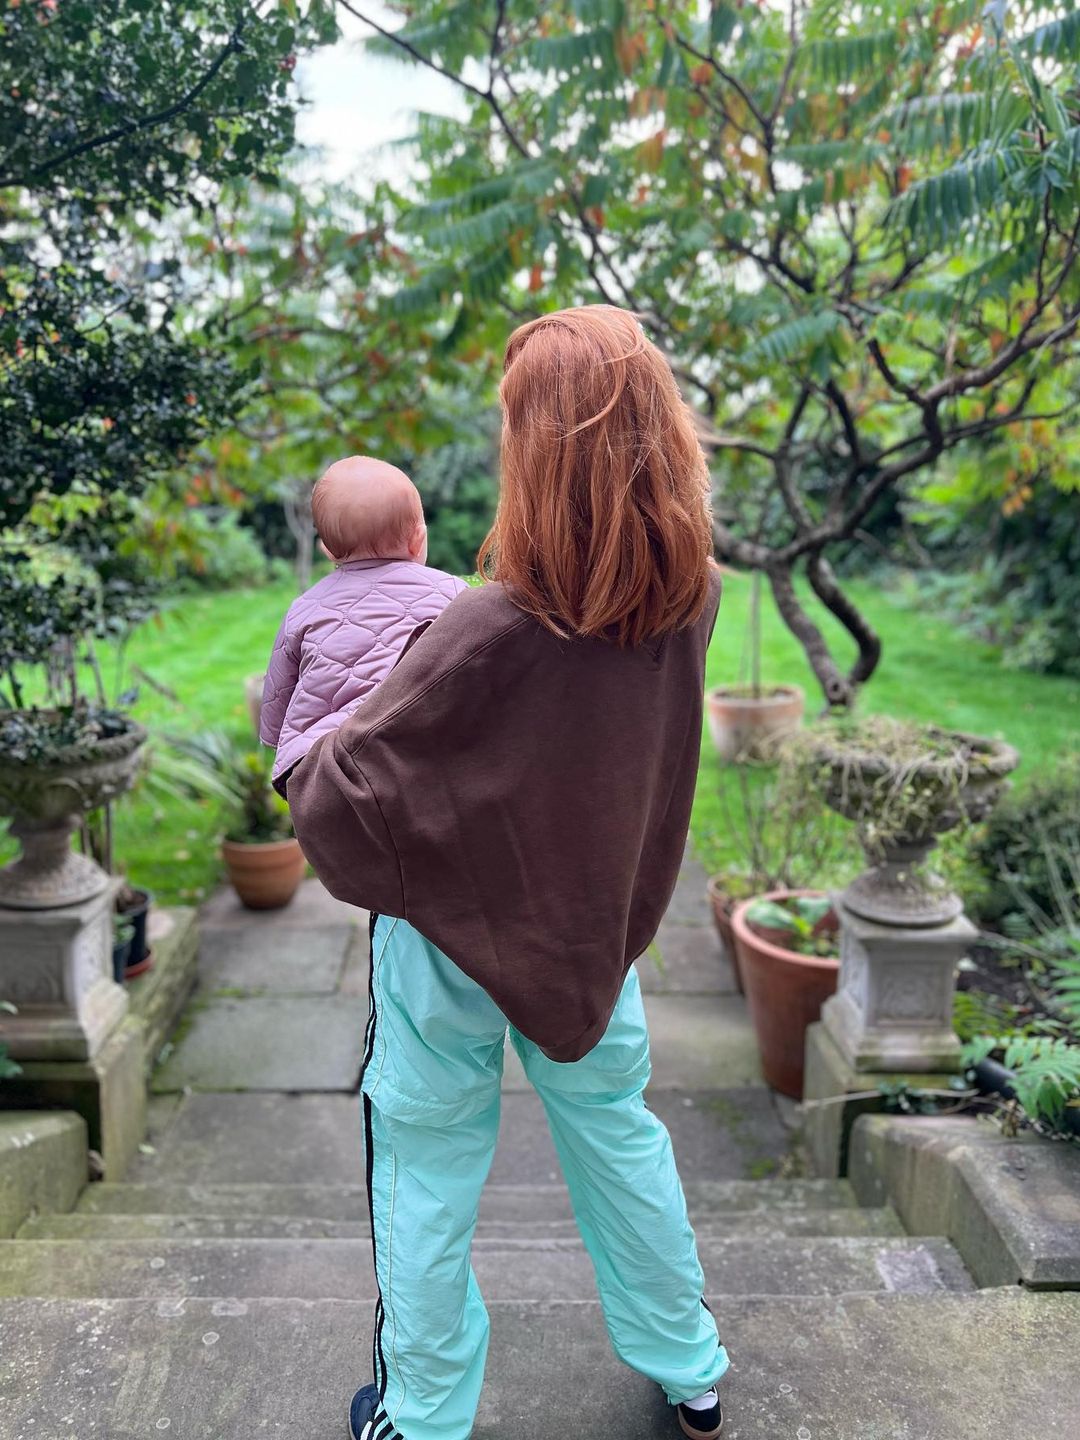 stacey dooley holding baby on steps 